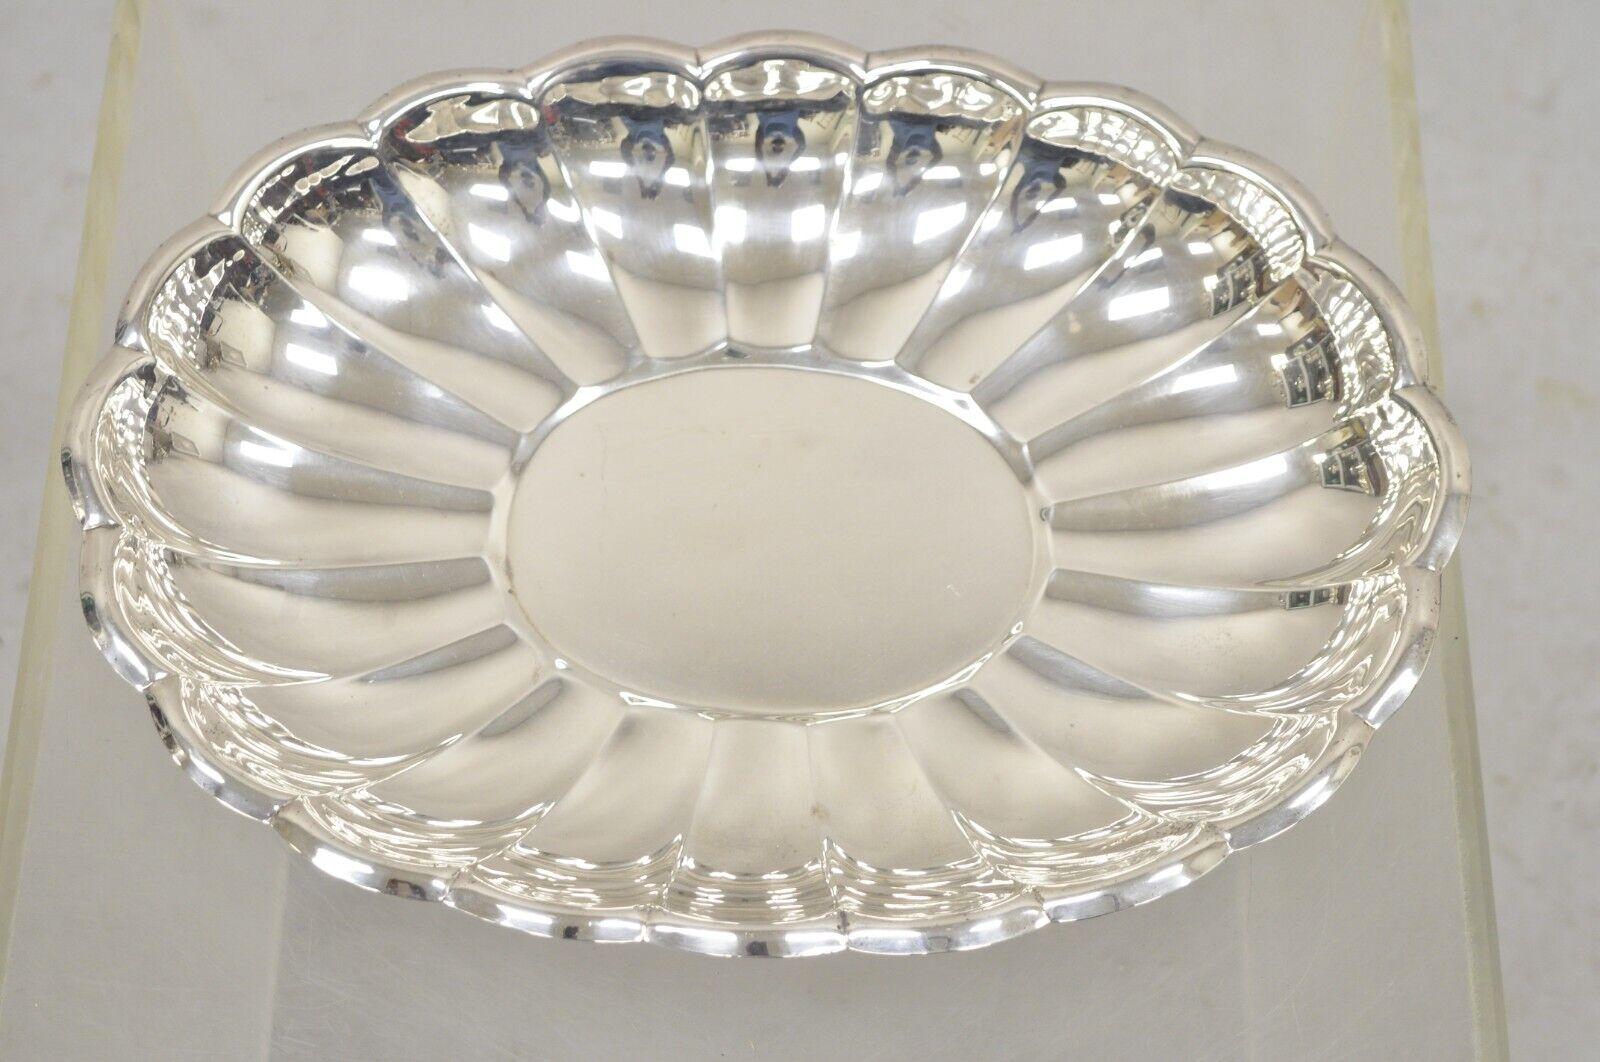 Vintage Regency Style Silver Plated Scalloped Oval Serving Platter Fruit Bowl In Good Condition For Sale In Philadelphia, PA